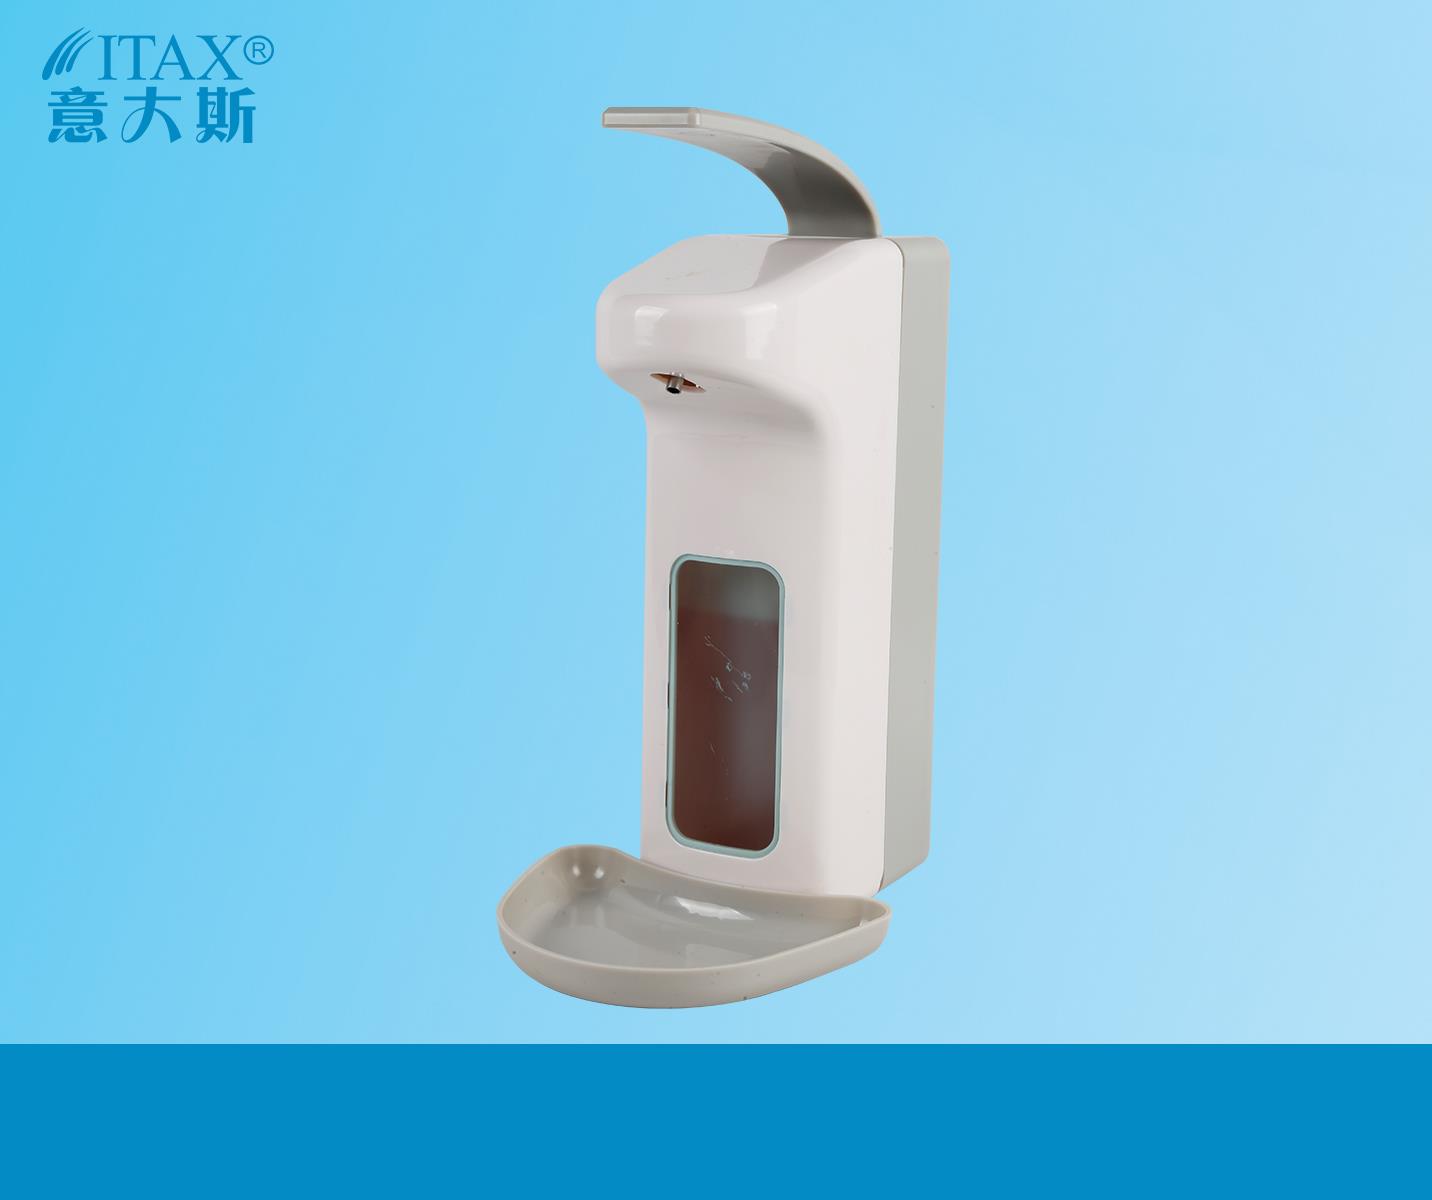 Manual soap dispenser wall-mounted wall-mounted soap dispenser hospital manual soap dispenser elbow pressure disinfection soap dispenser stainless steel press soap dispenser X-2261